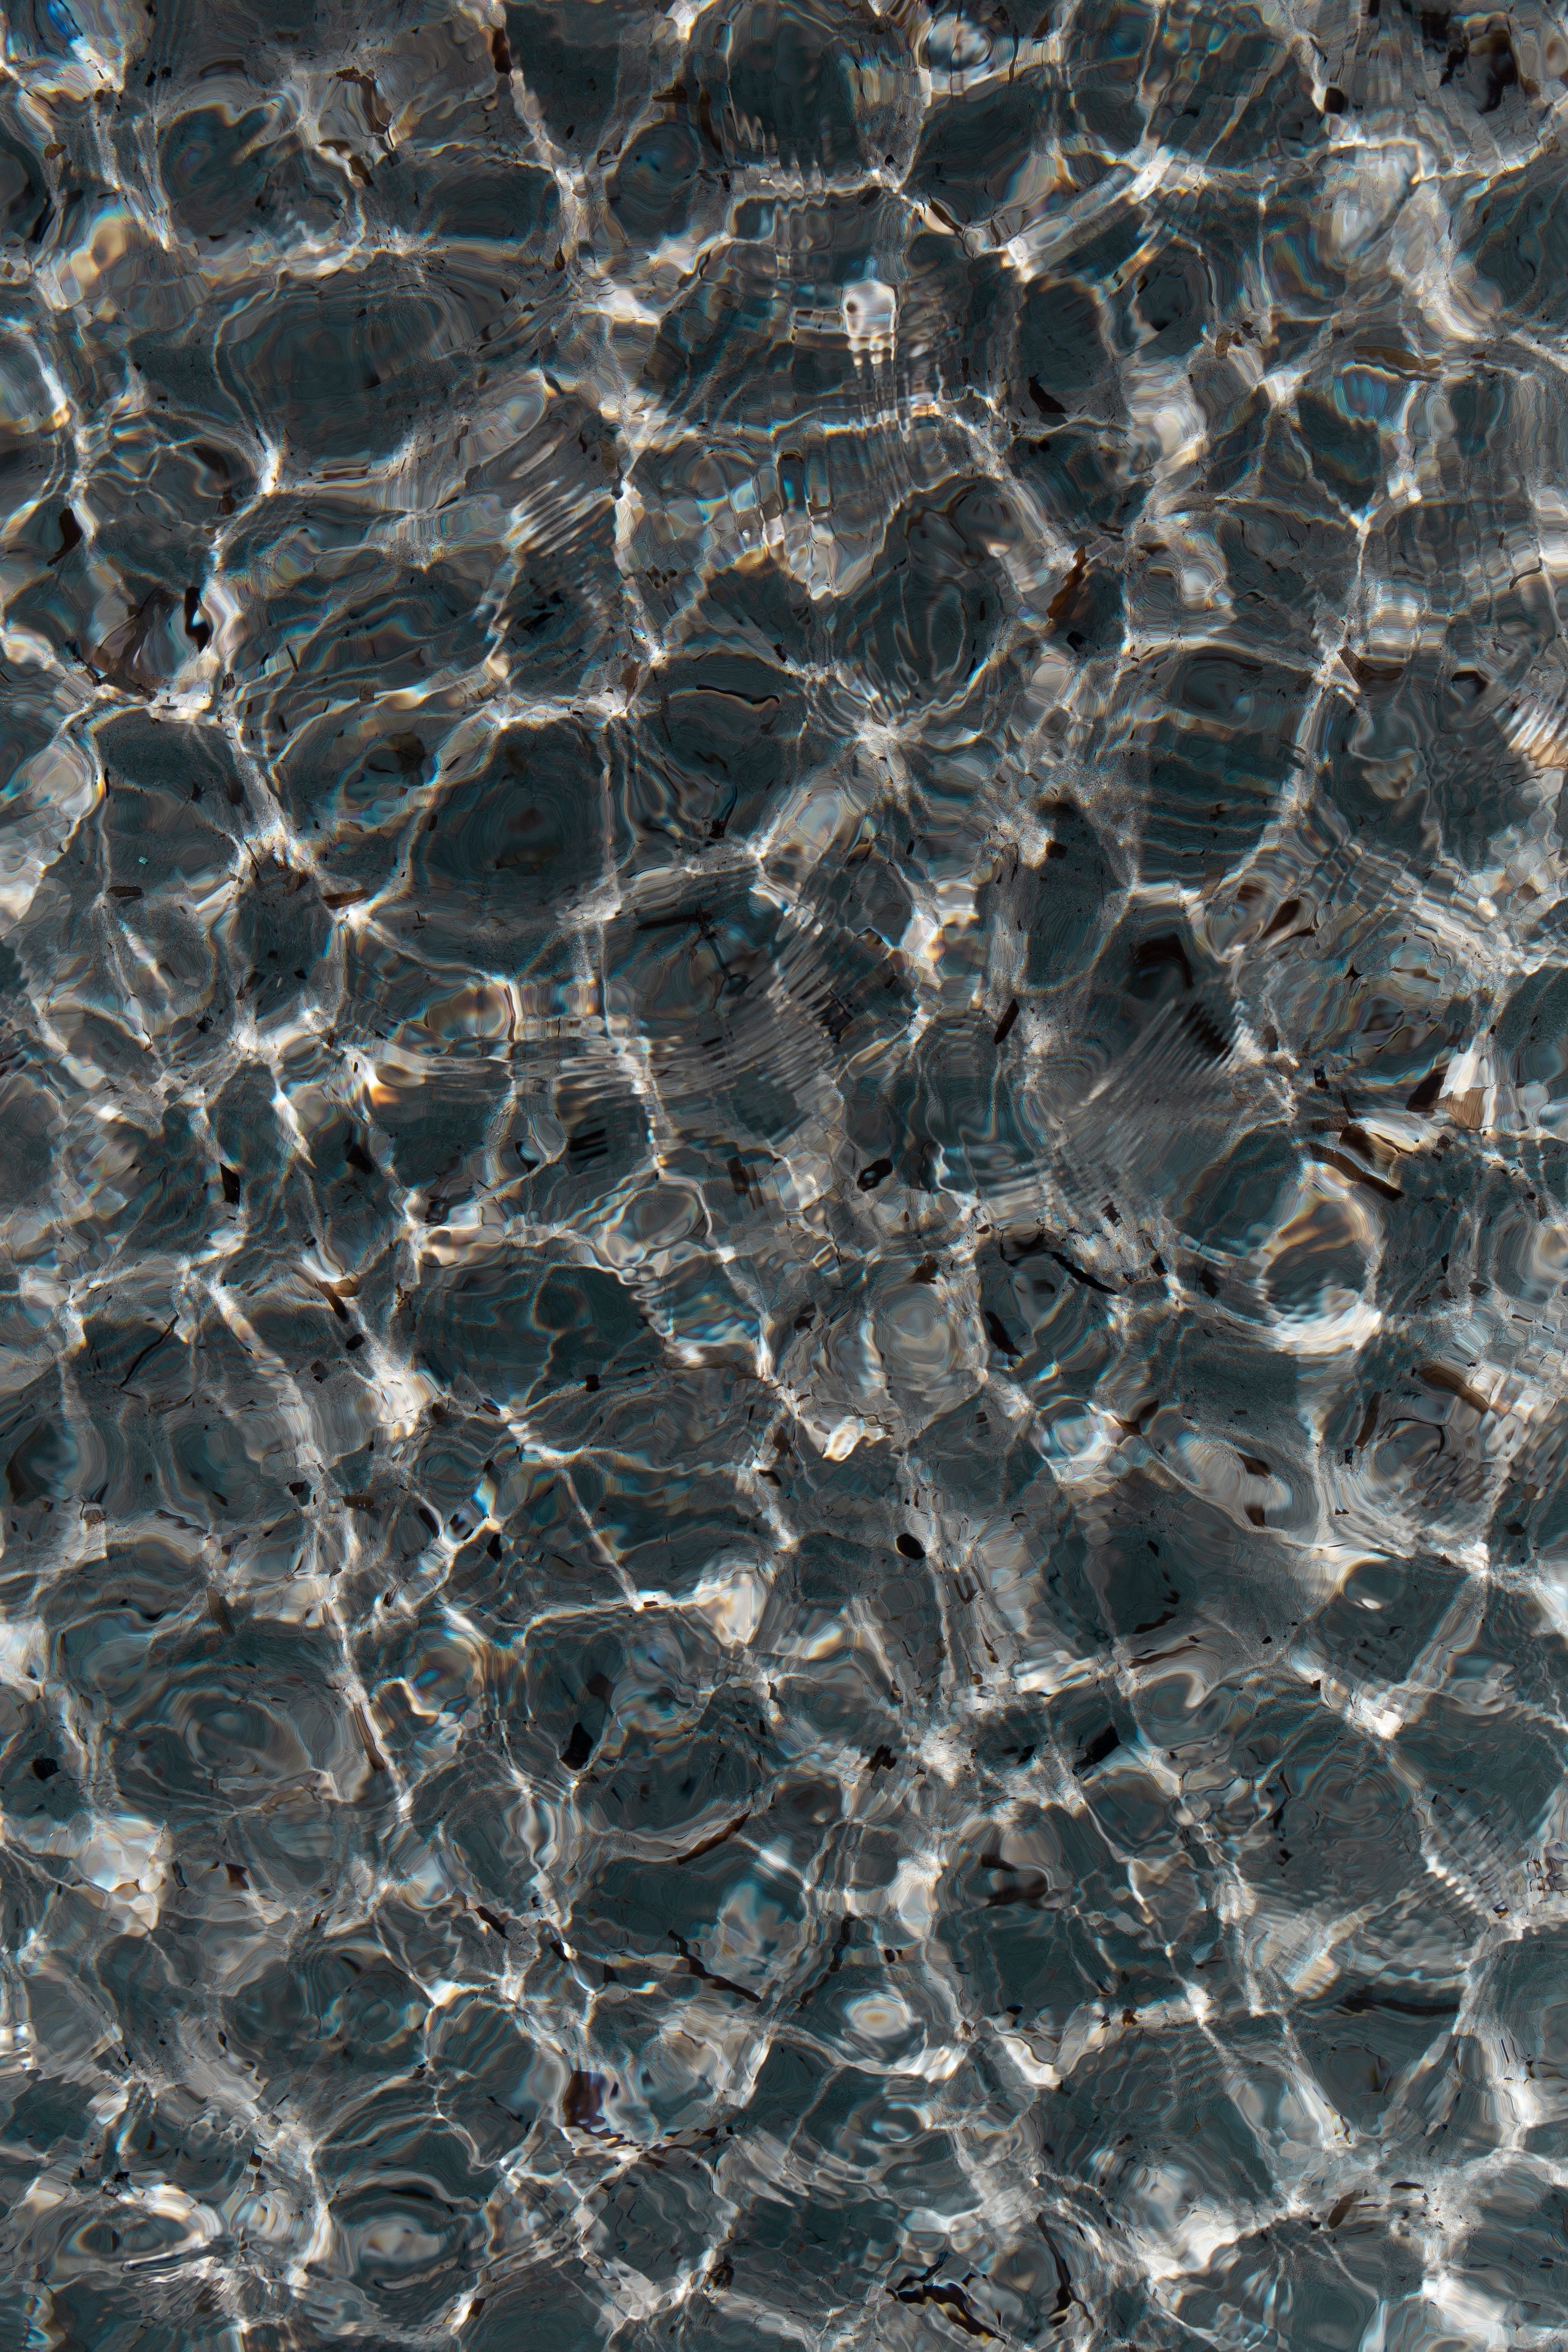 1080p pic textures, texture, water, surface